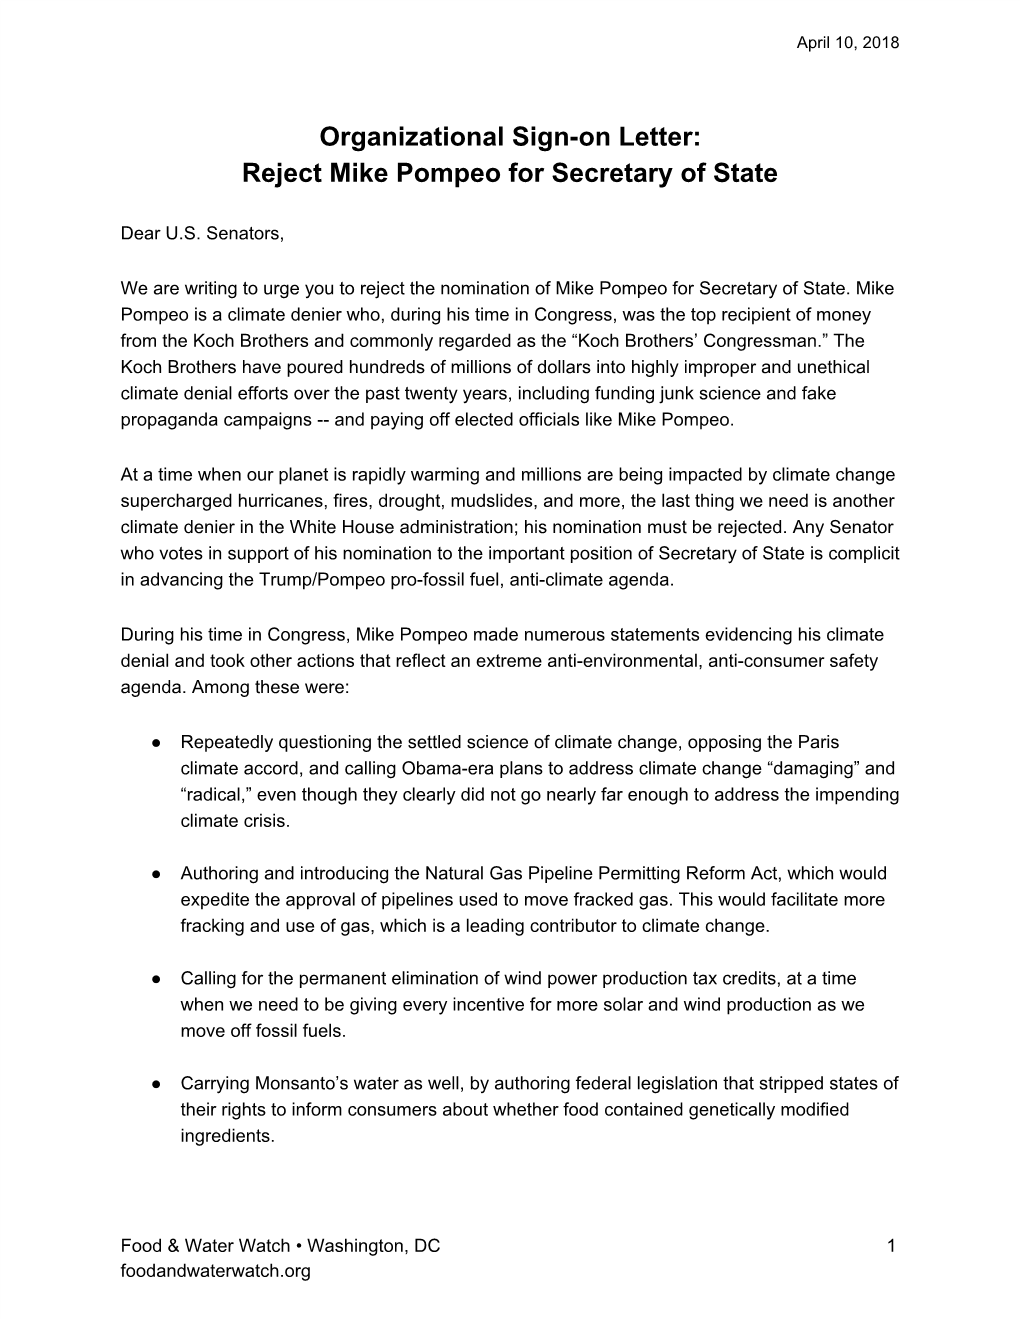 Organizational Sign-On Letter: Reject Mike Pompeo for Secretary of State